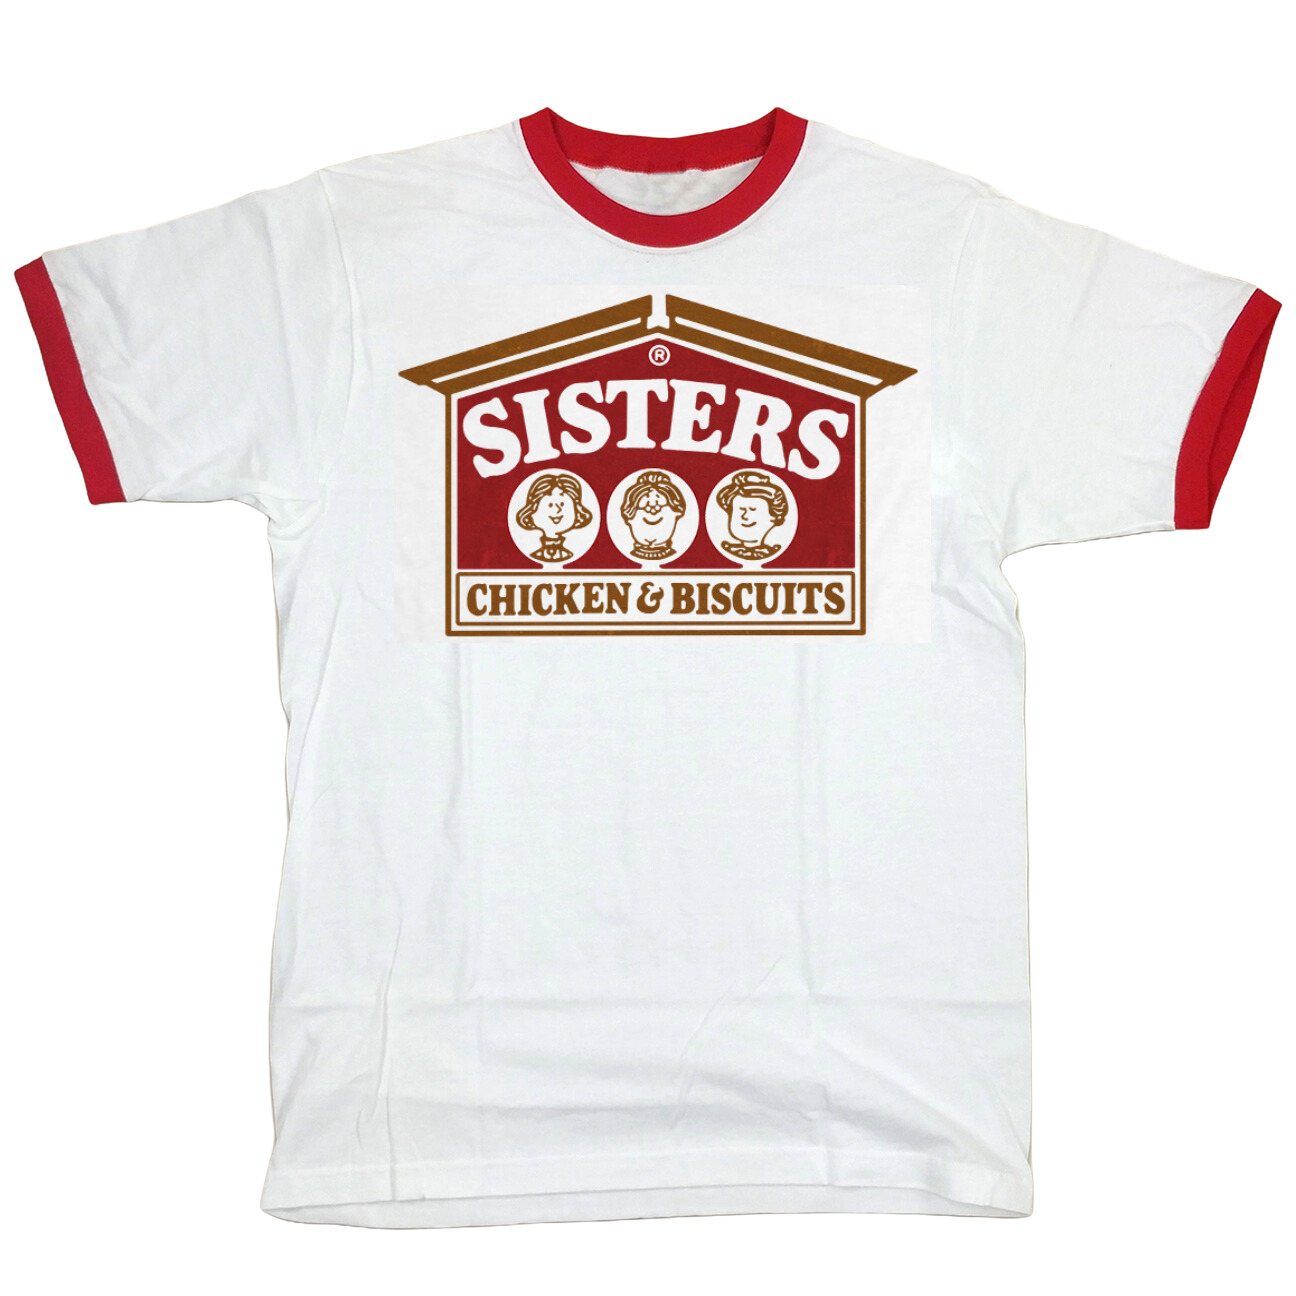 Sisters Chicken & Biscuits Ringer Tee Old School Shirts